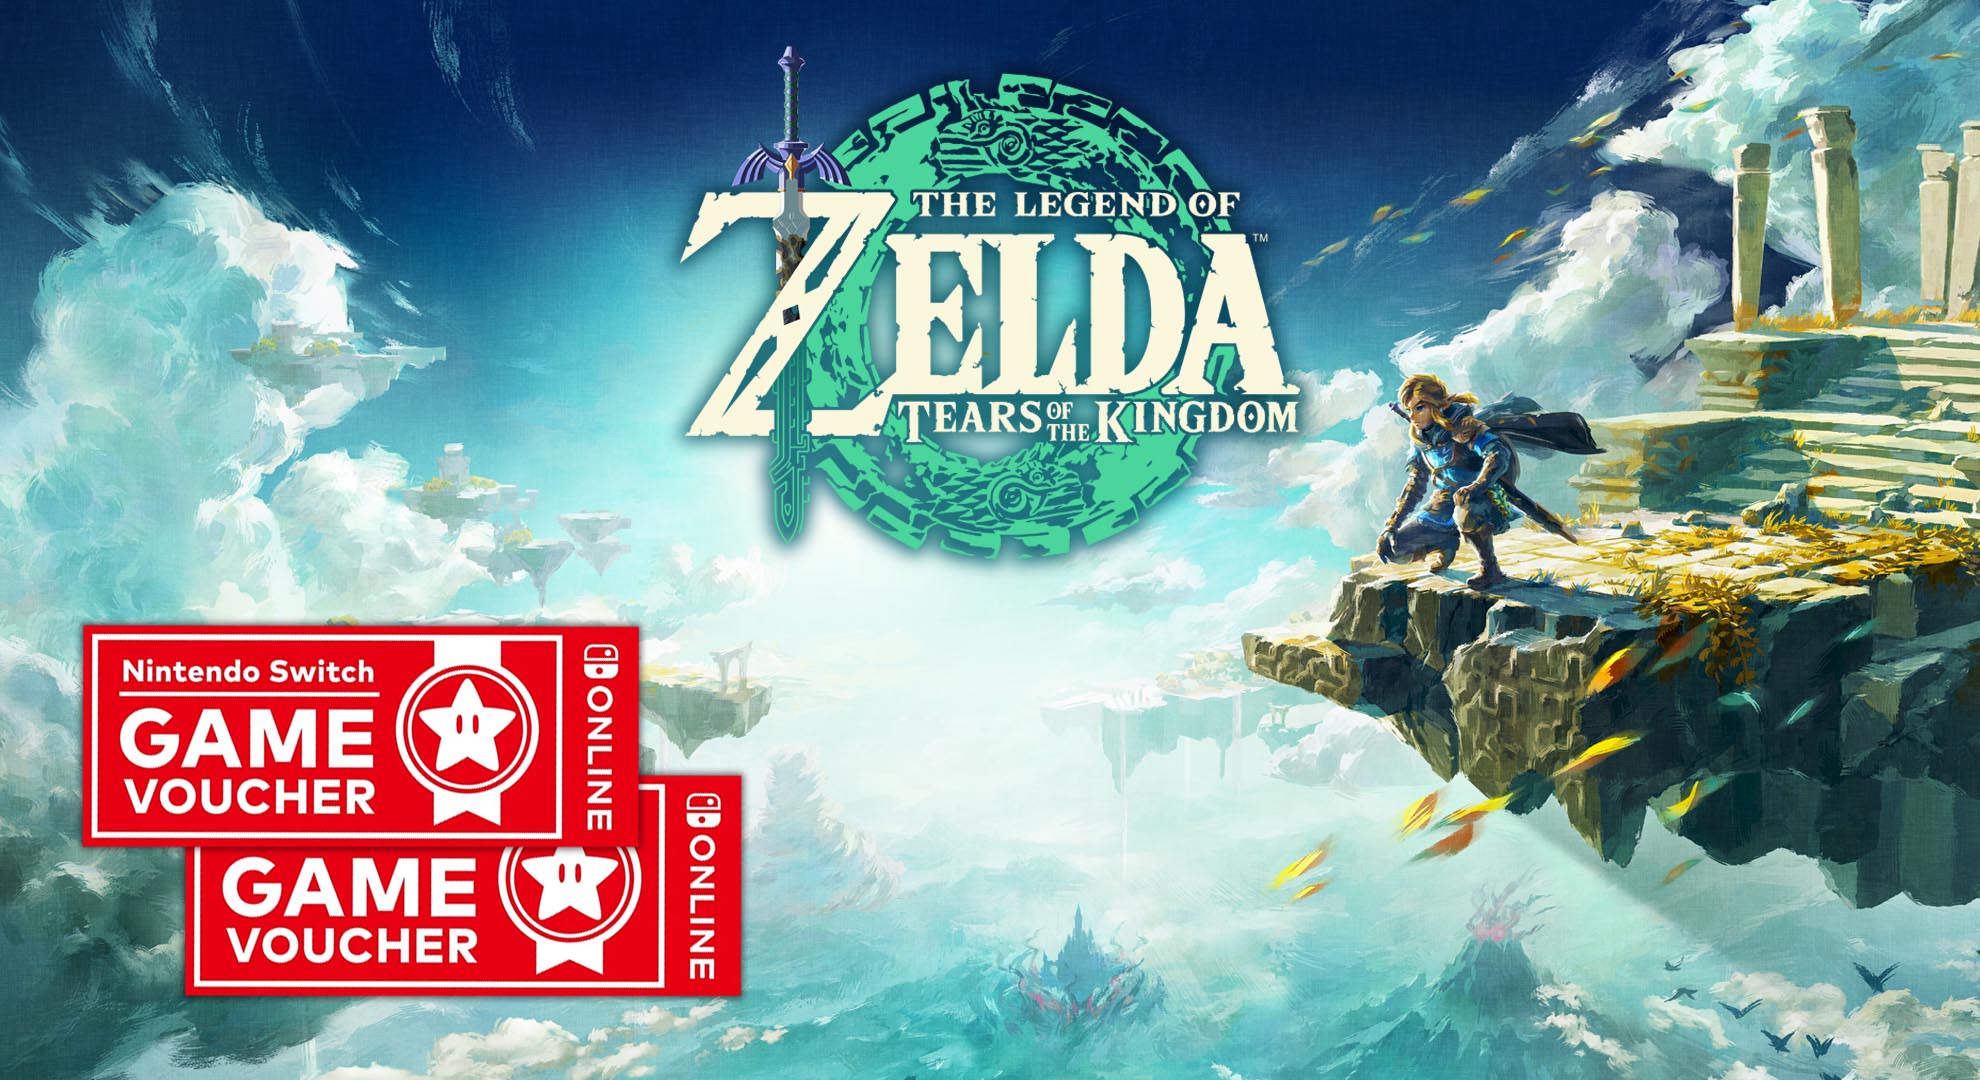 The Legend of Zelda™️: Tears of the Kingdom for Nintendo Switch™️ – Videos